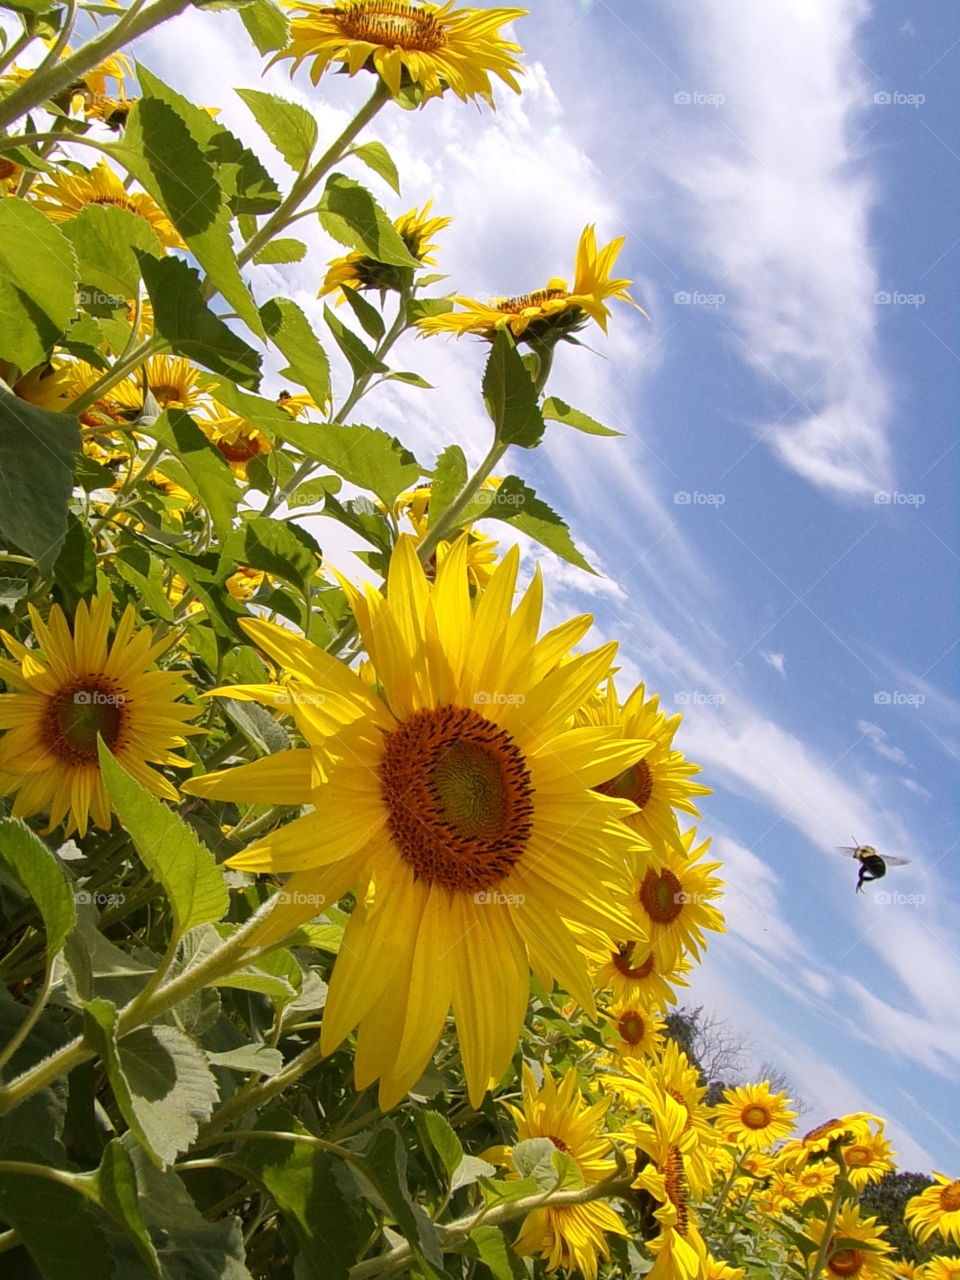 Beautiful sunflowers in a field with bees midair 